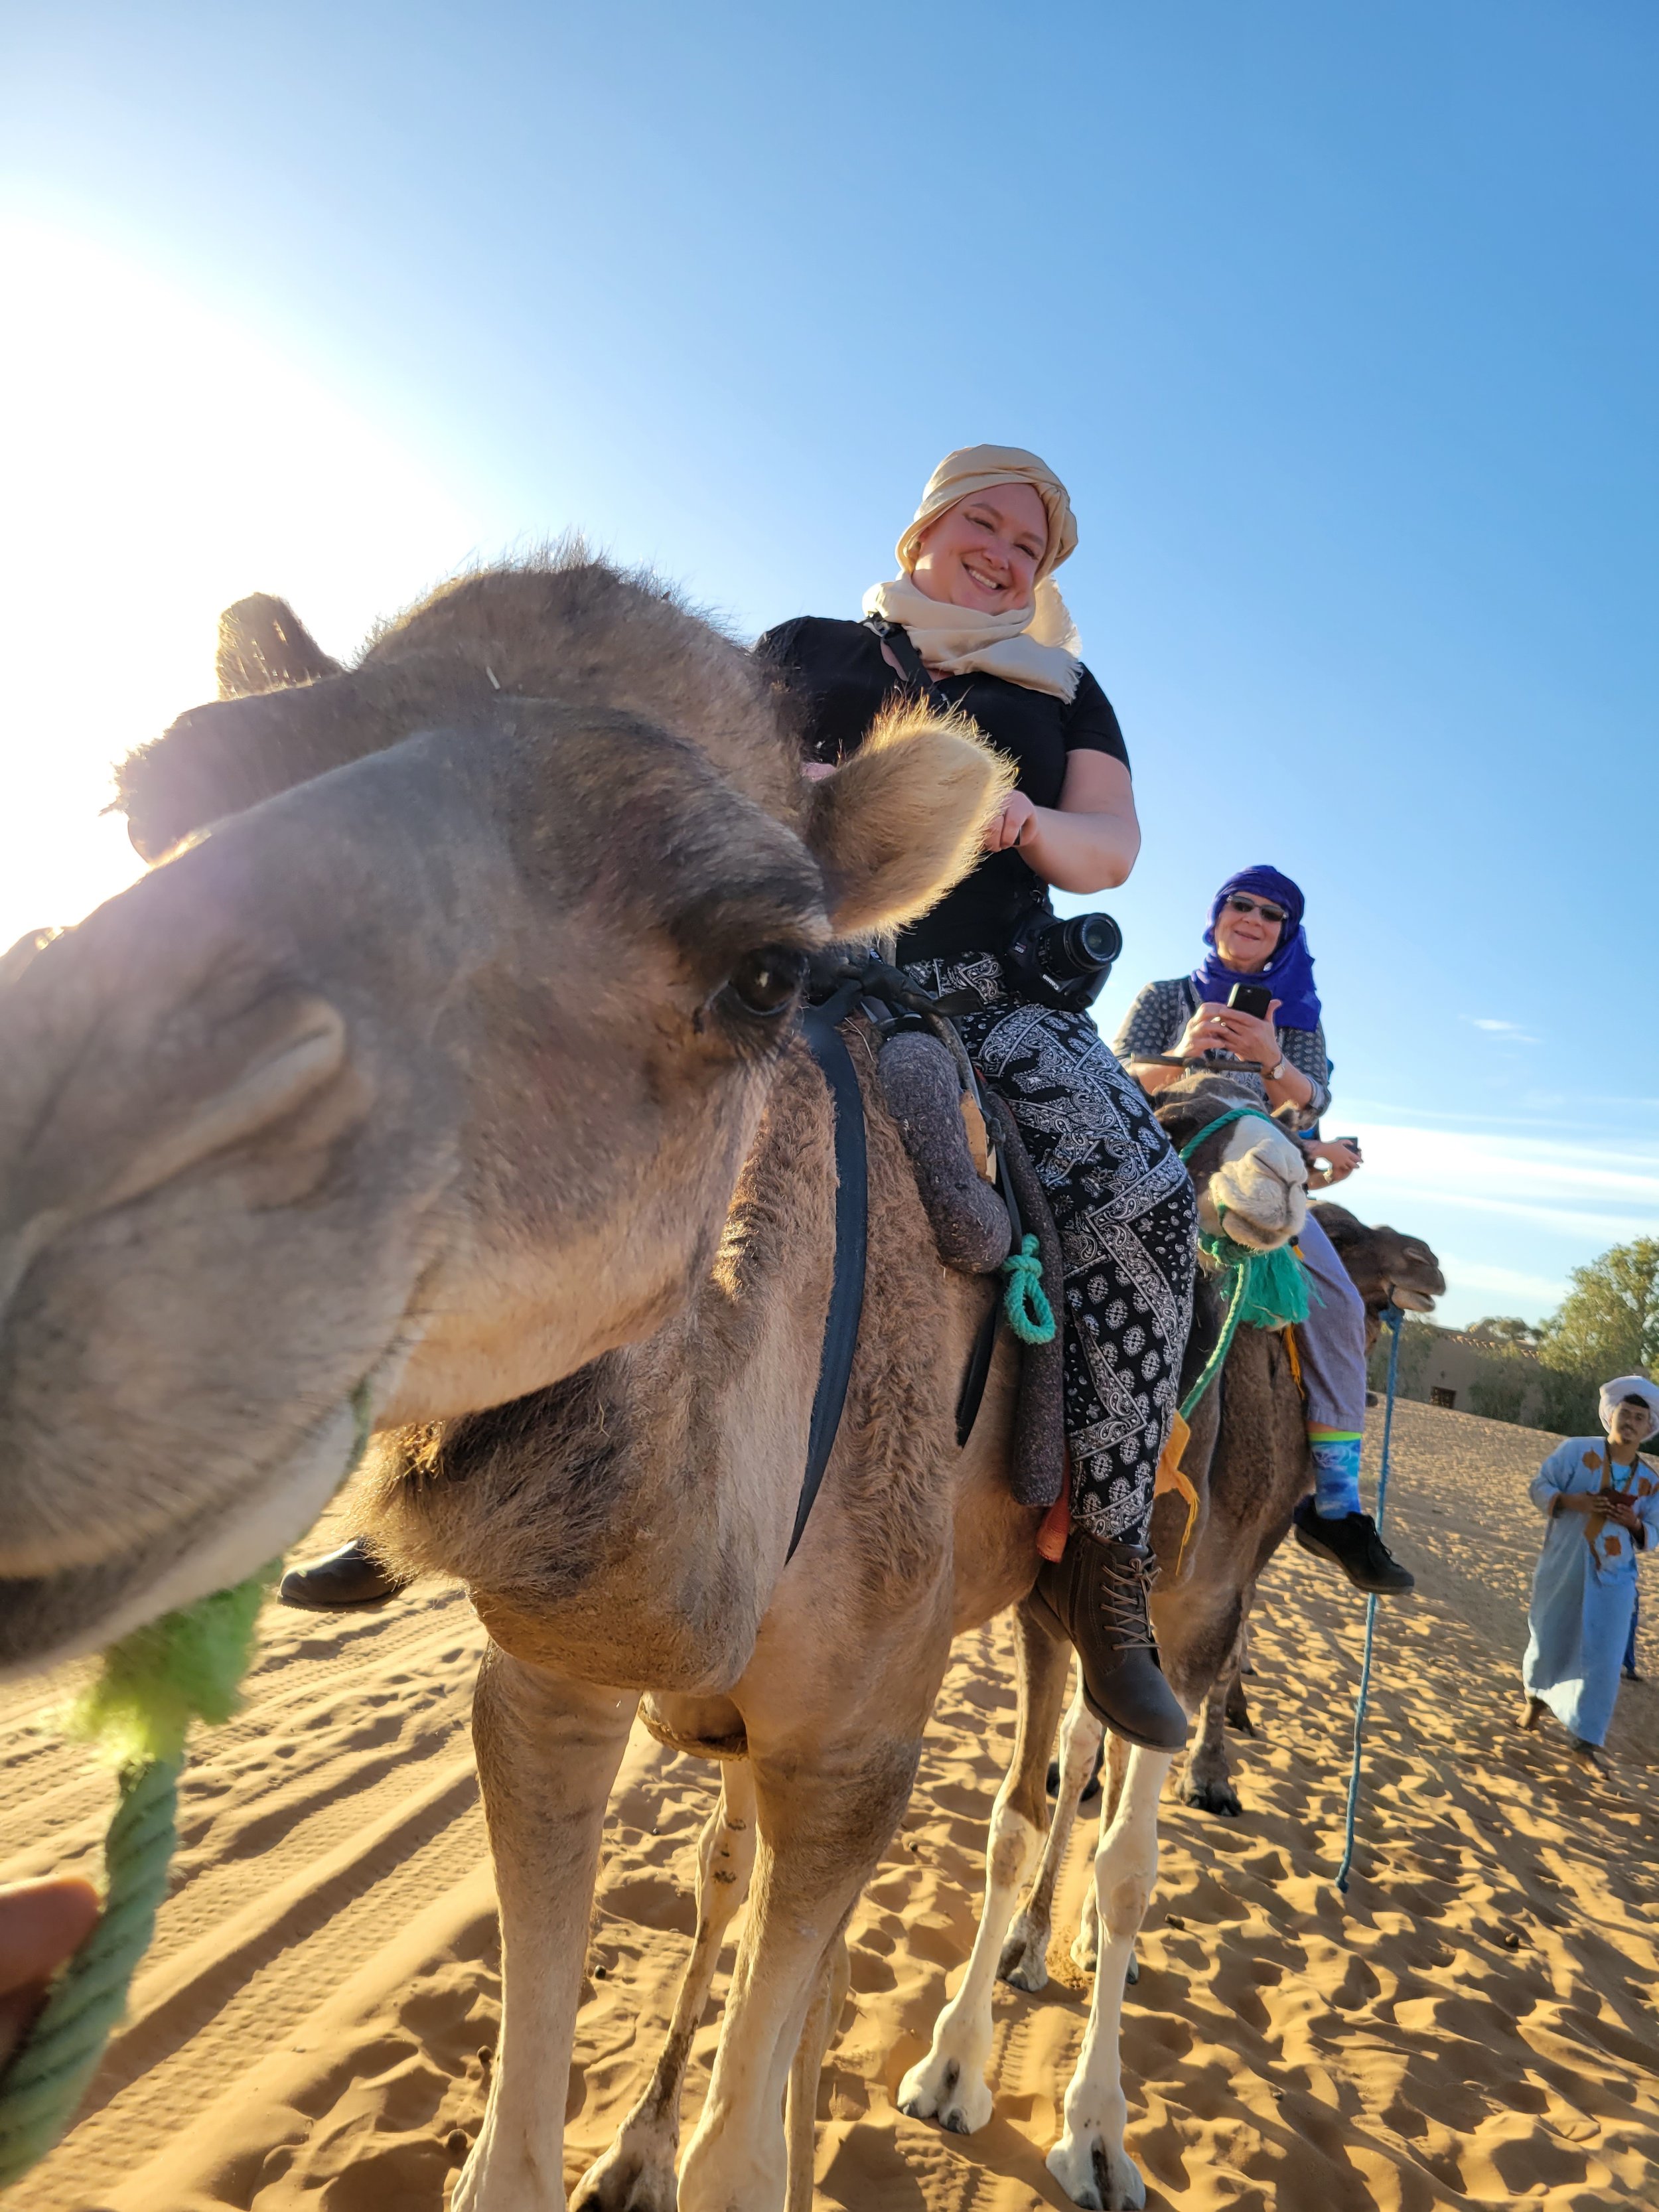 Two women with turbans ride camels through the Sahara desert